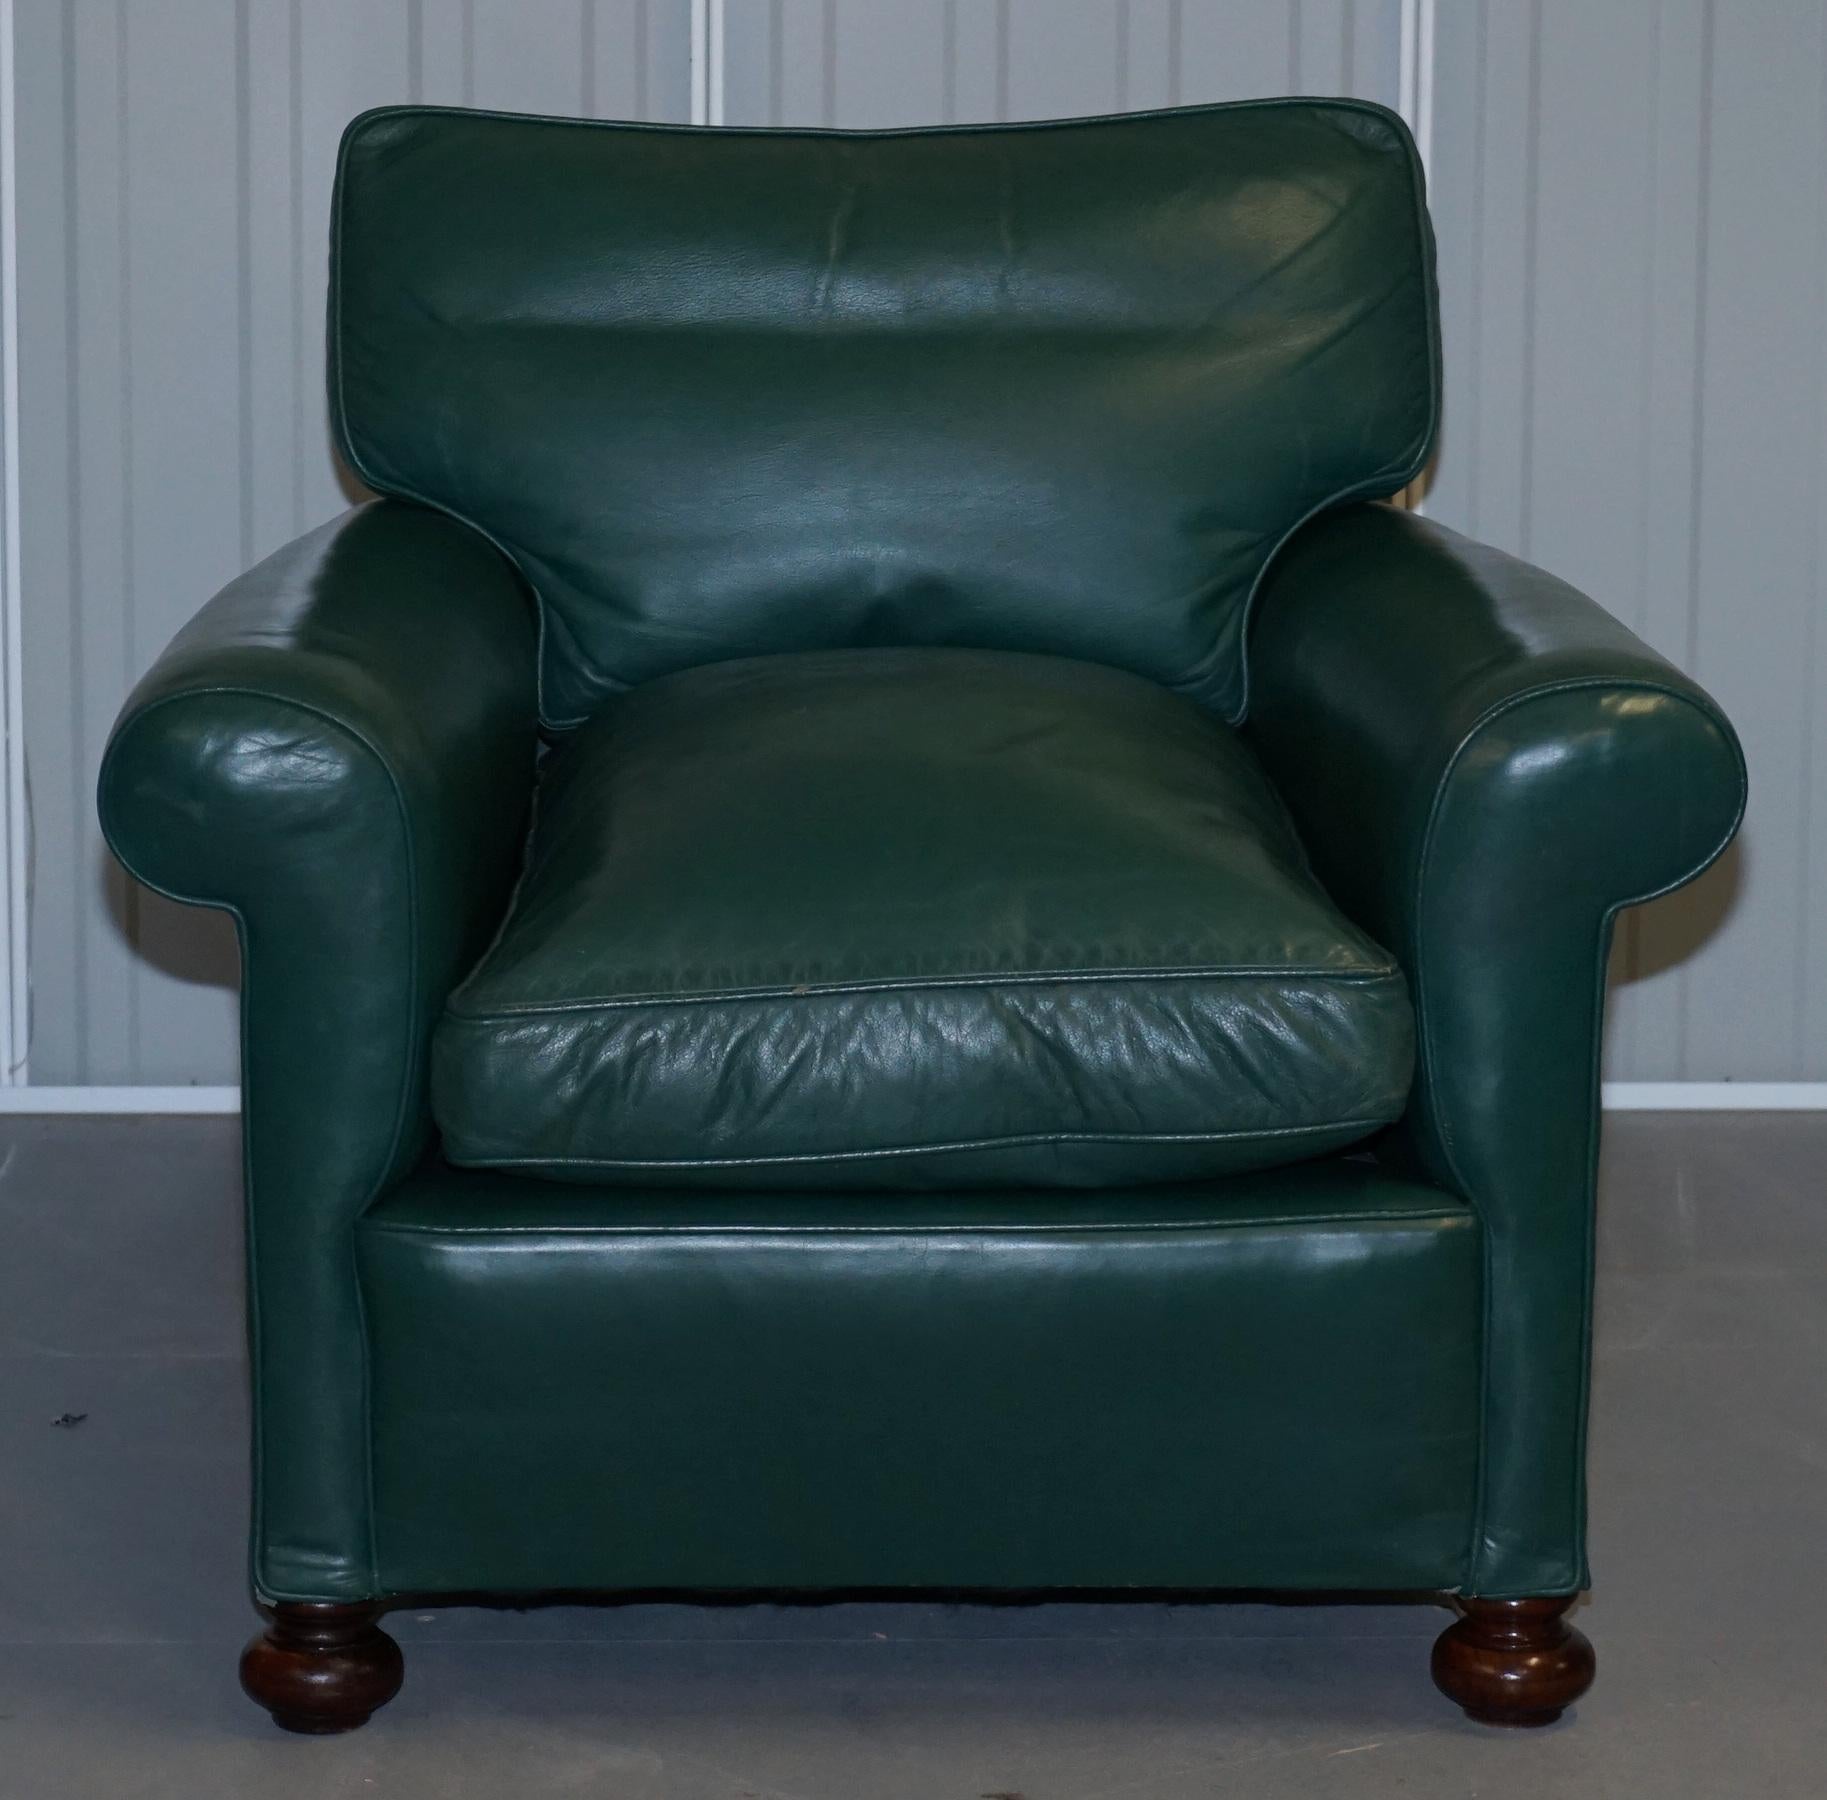 Pair of Edwardian circa 1910 Soft Green Leather Feather Filled Cushion Armchairs 8